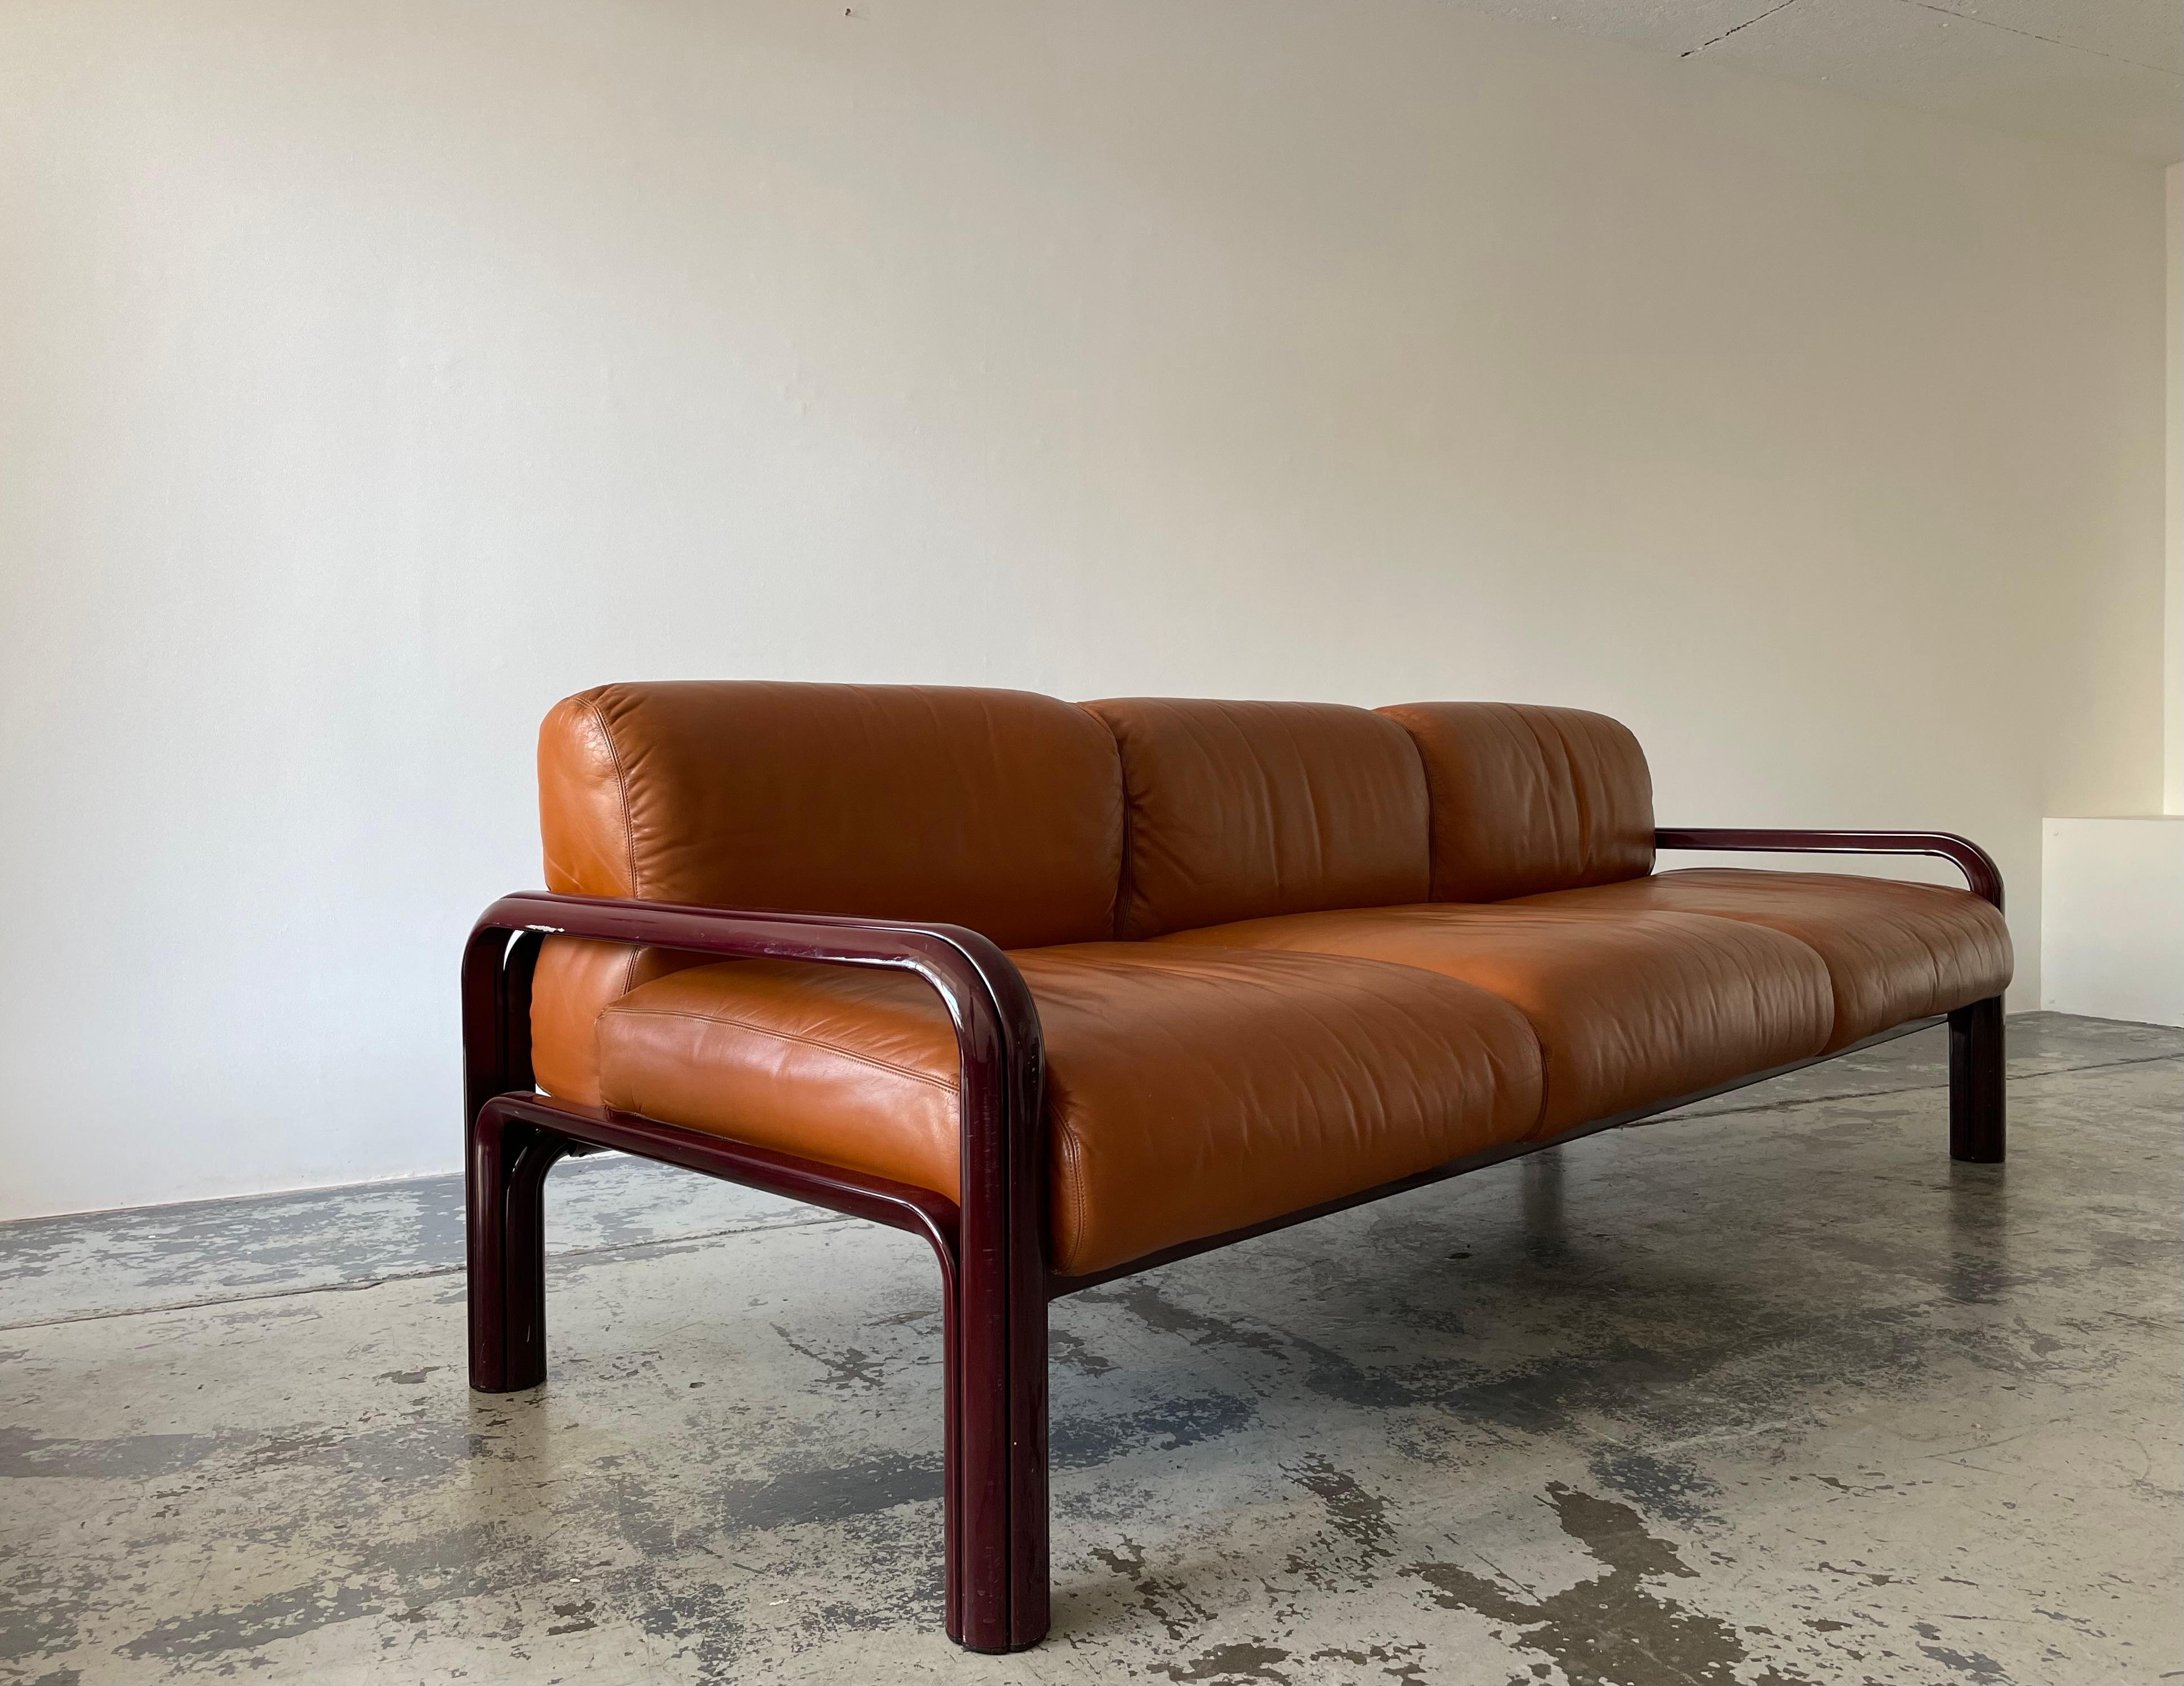 Three seaters sofa in cognac leather designed by Gae Aulenti in 1976 as part of the lounge seating line for the Aulenti Collection of Knoll International.

The lacquered burgundy frames are made from extruded steel.

The leather is in great